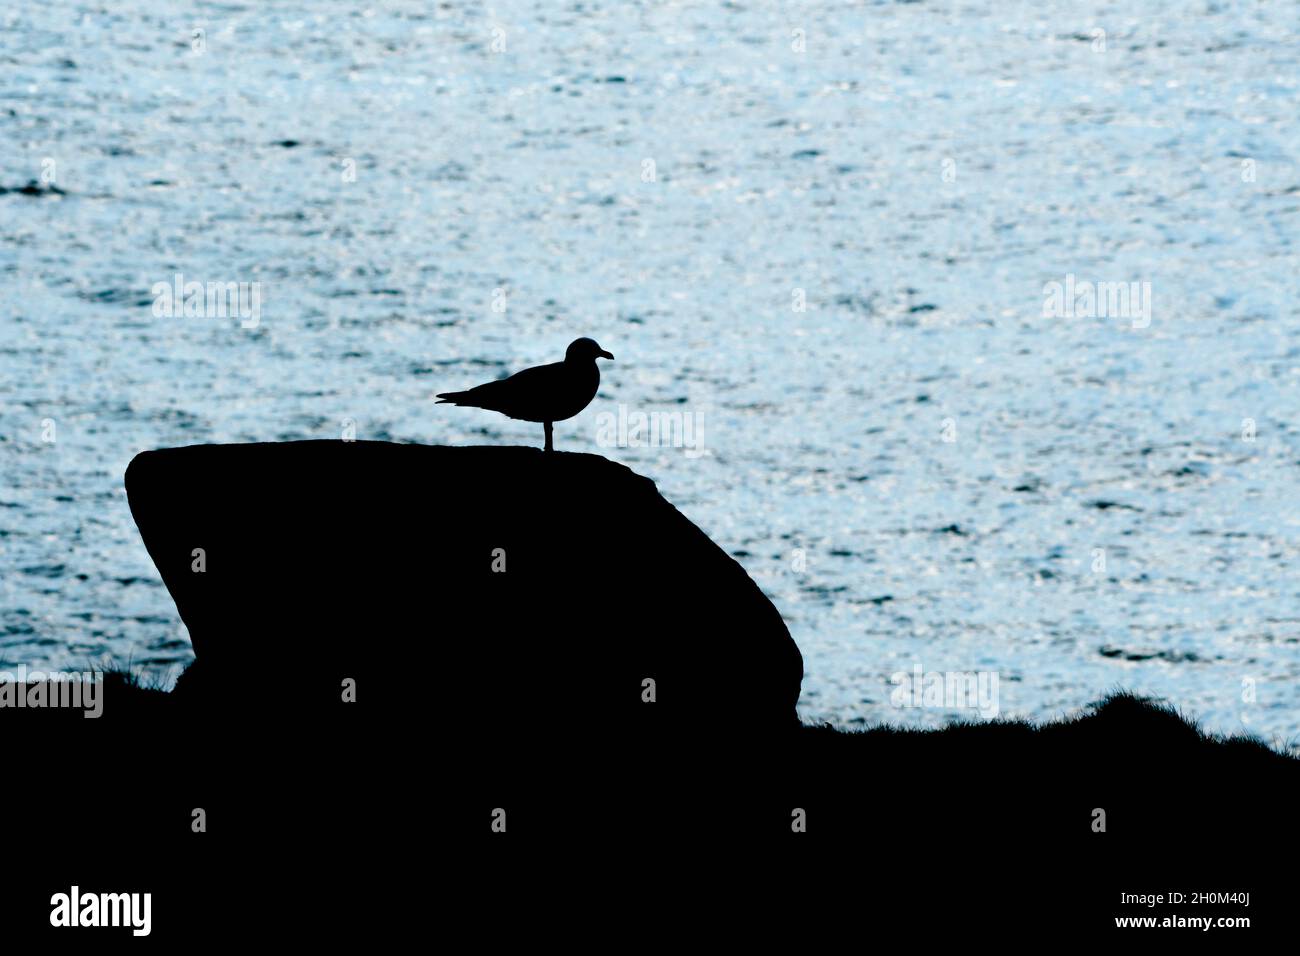 A European Herring Gull Larus argentatus standing on a rock seen in silhouette. Stock Photo